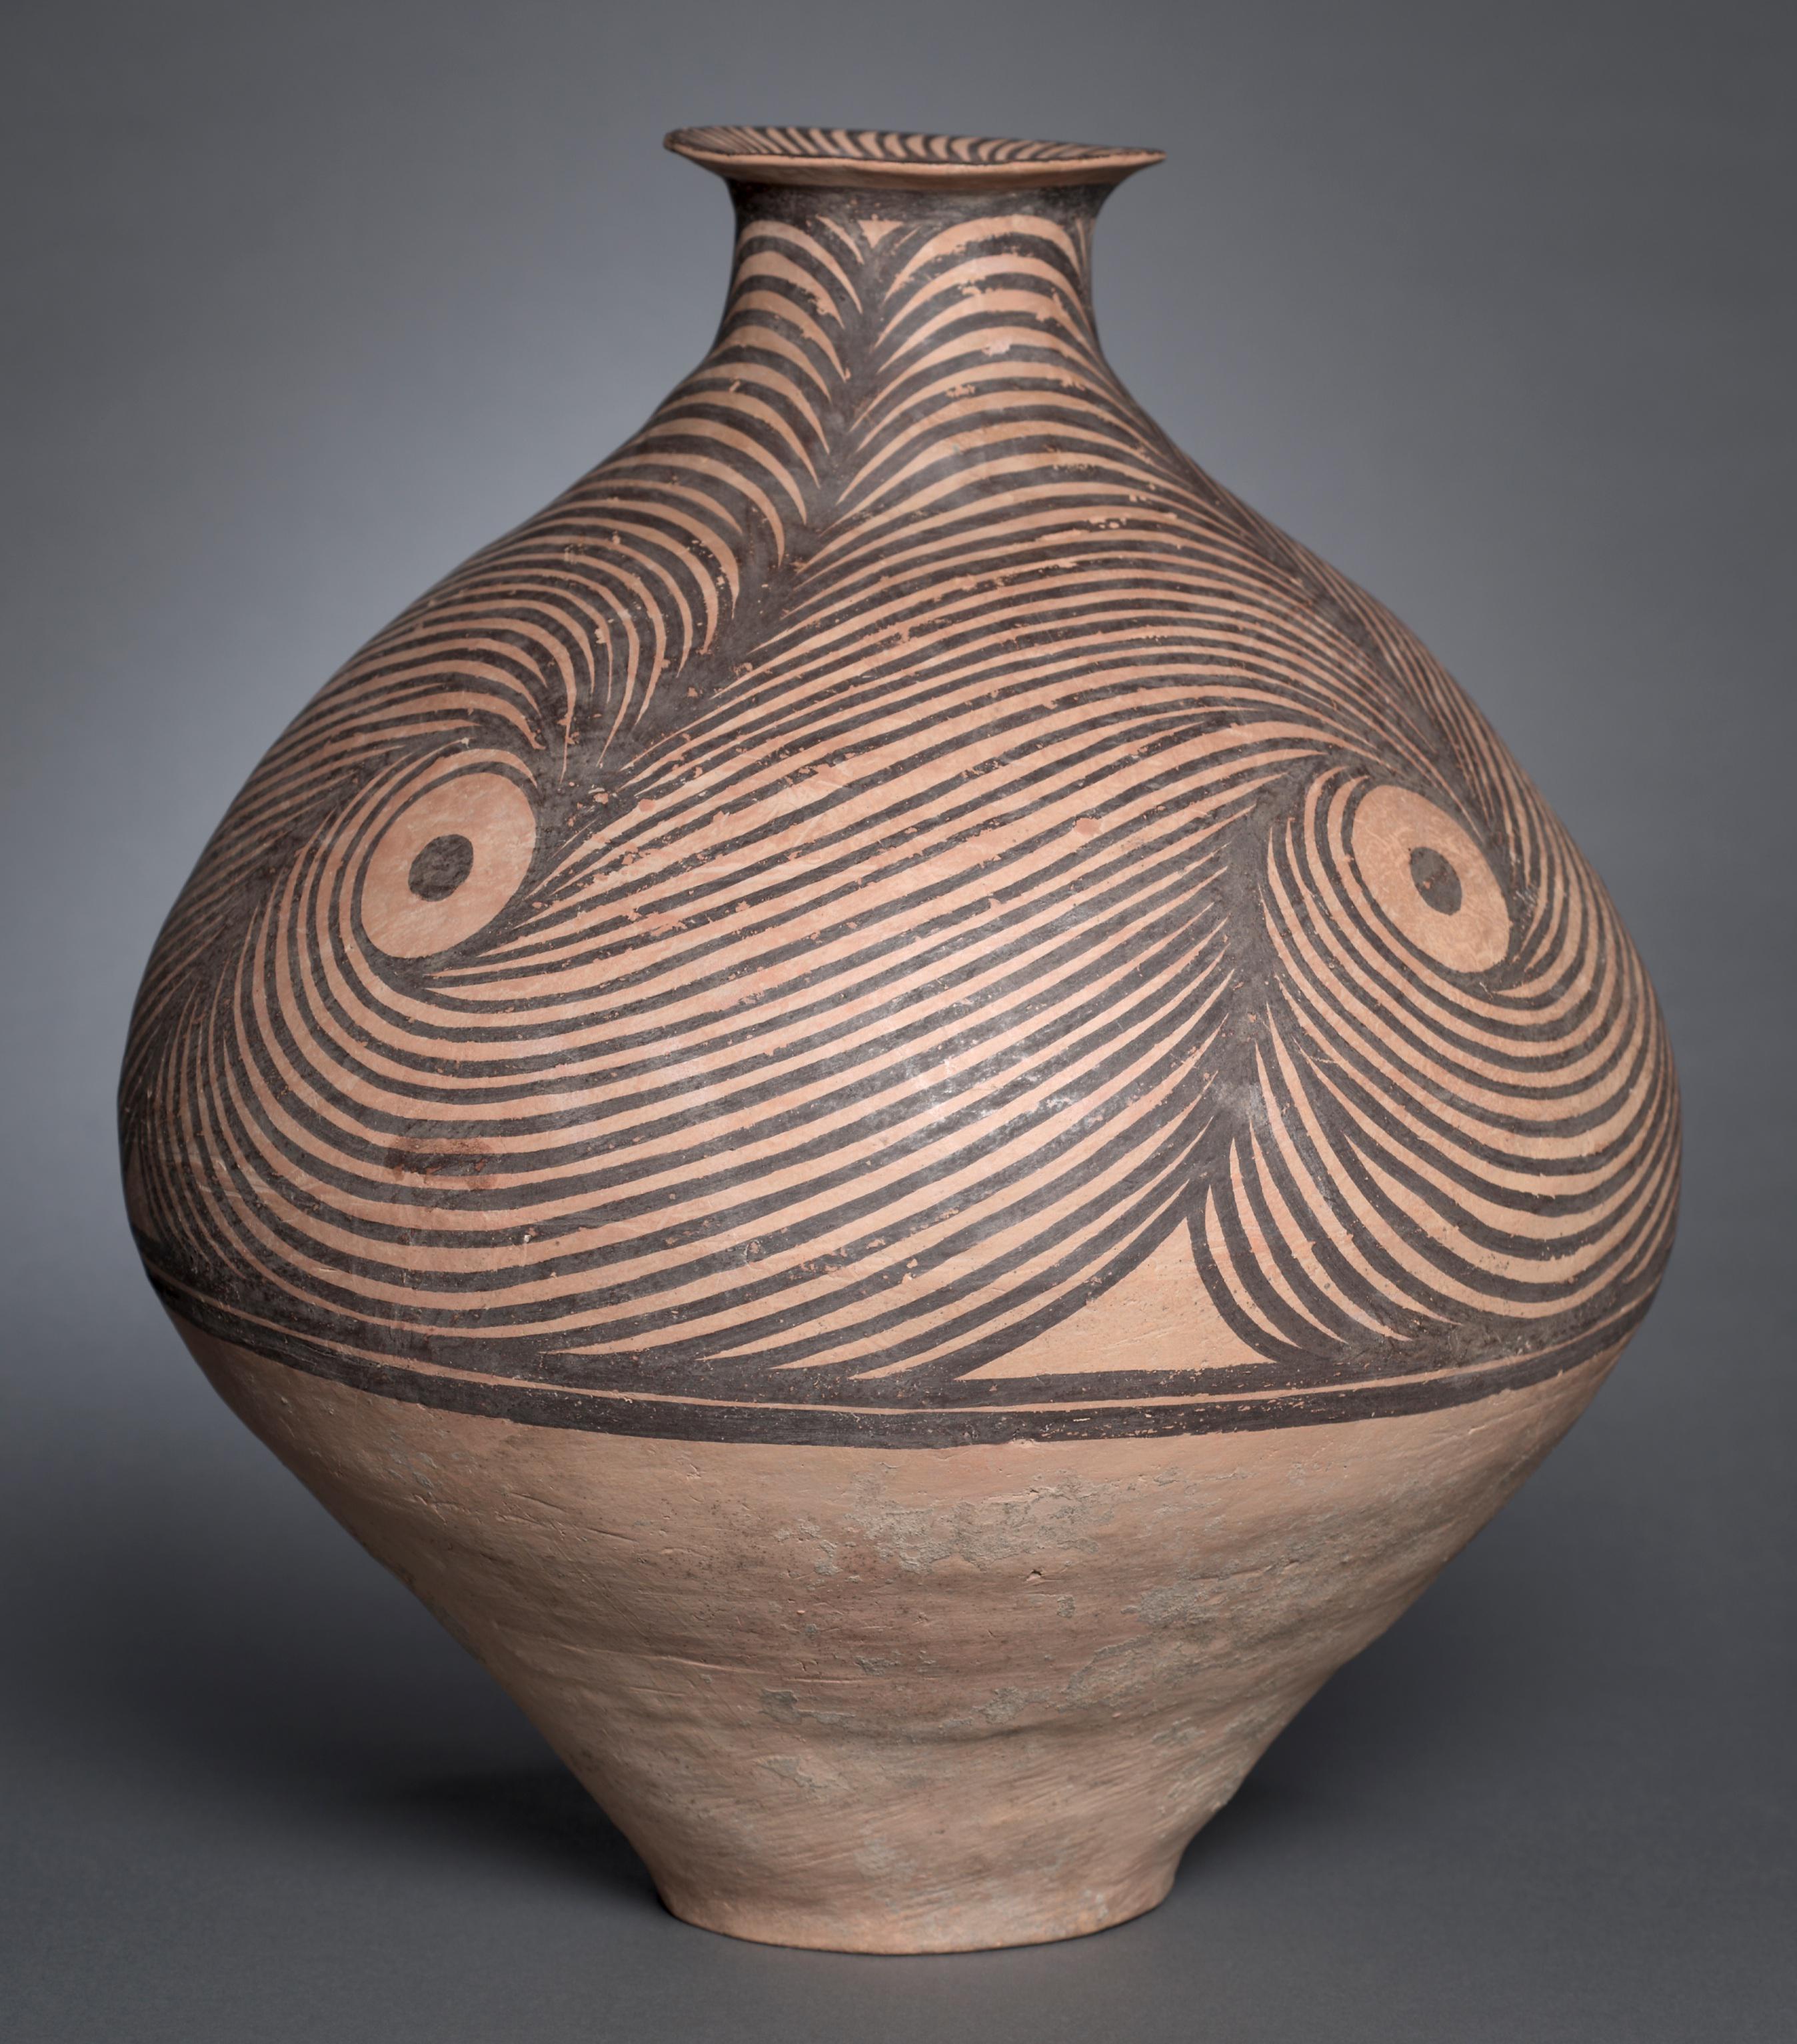 A jar with spiral designs from China. Majiayao culture, 3300-2650 BCE, now on display at the Cleveland museum of art.jpg